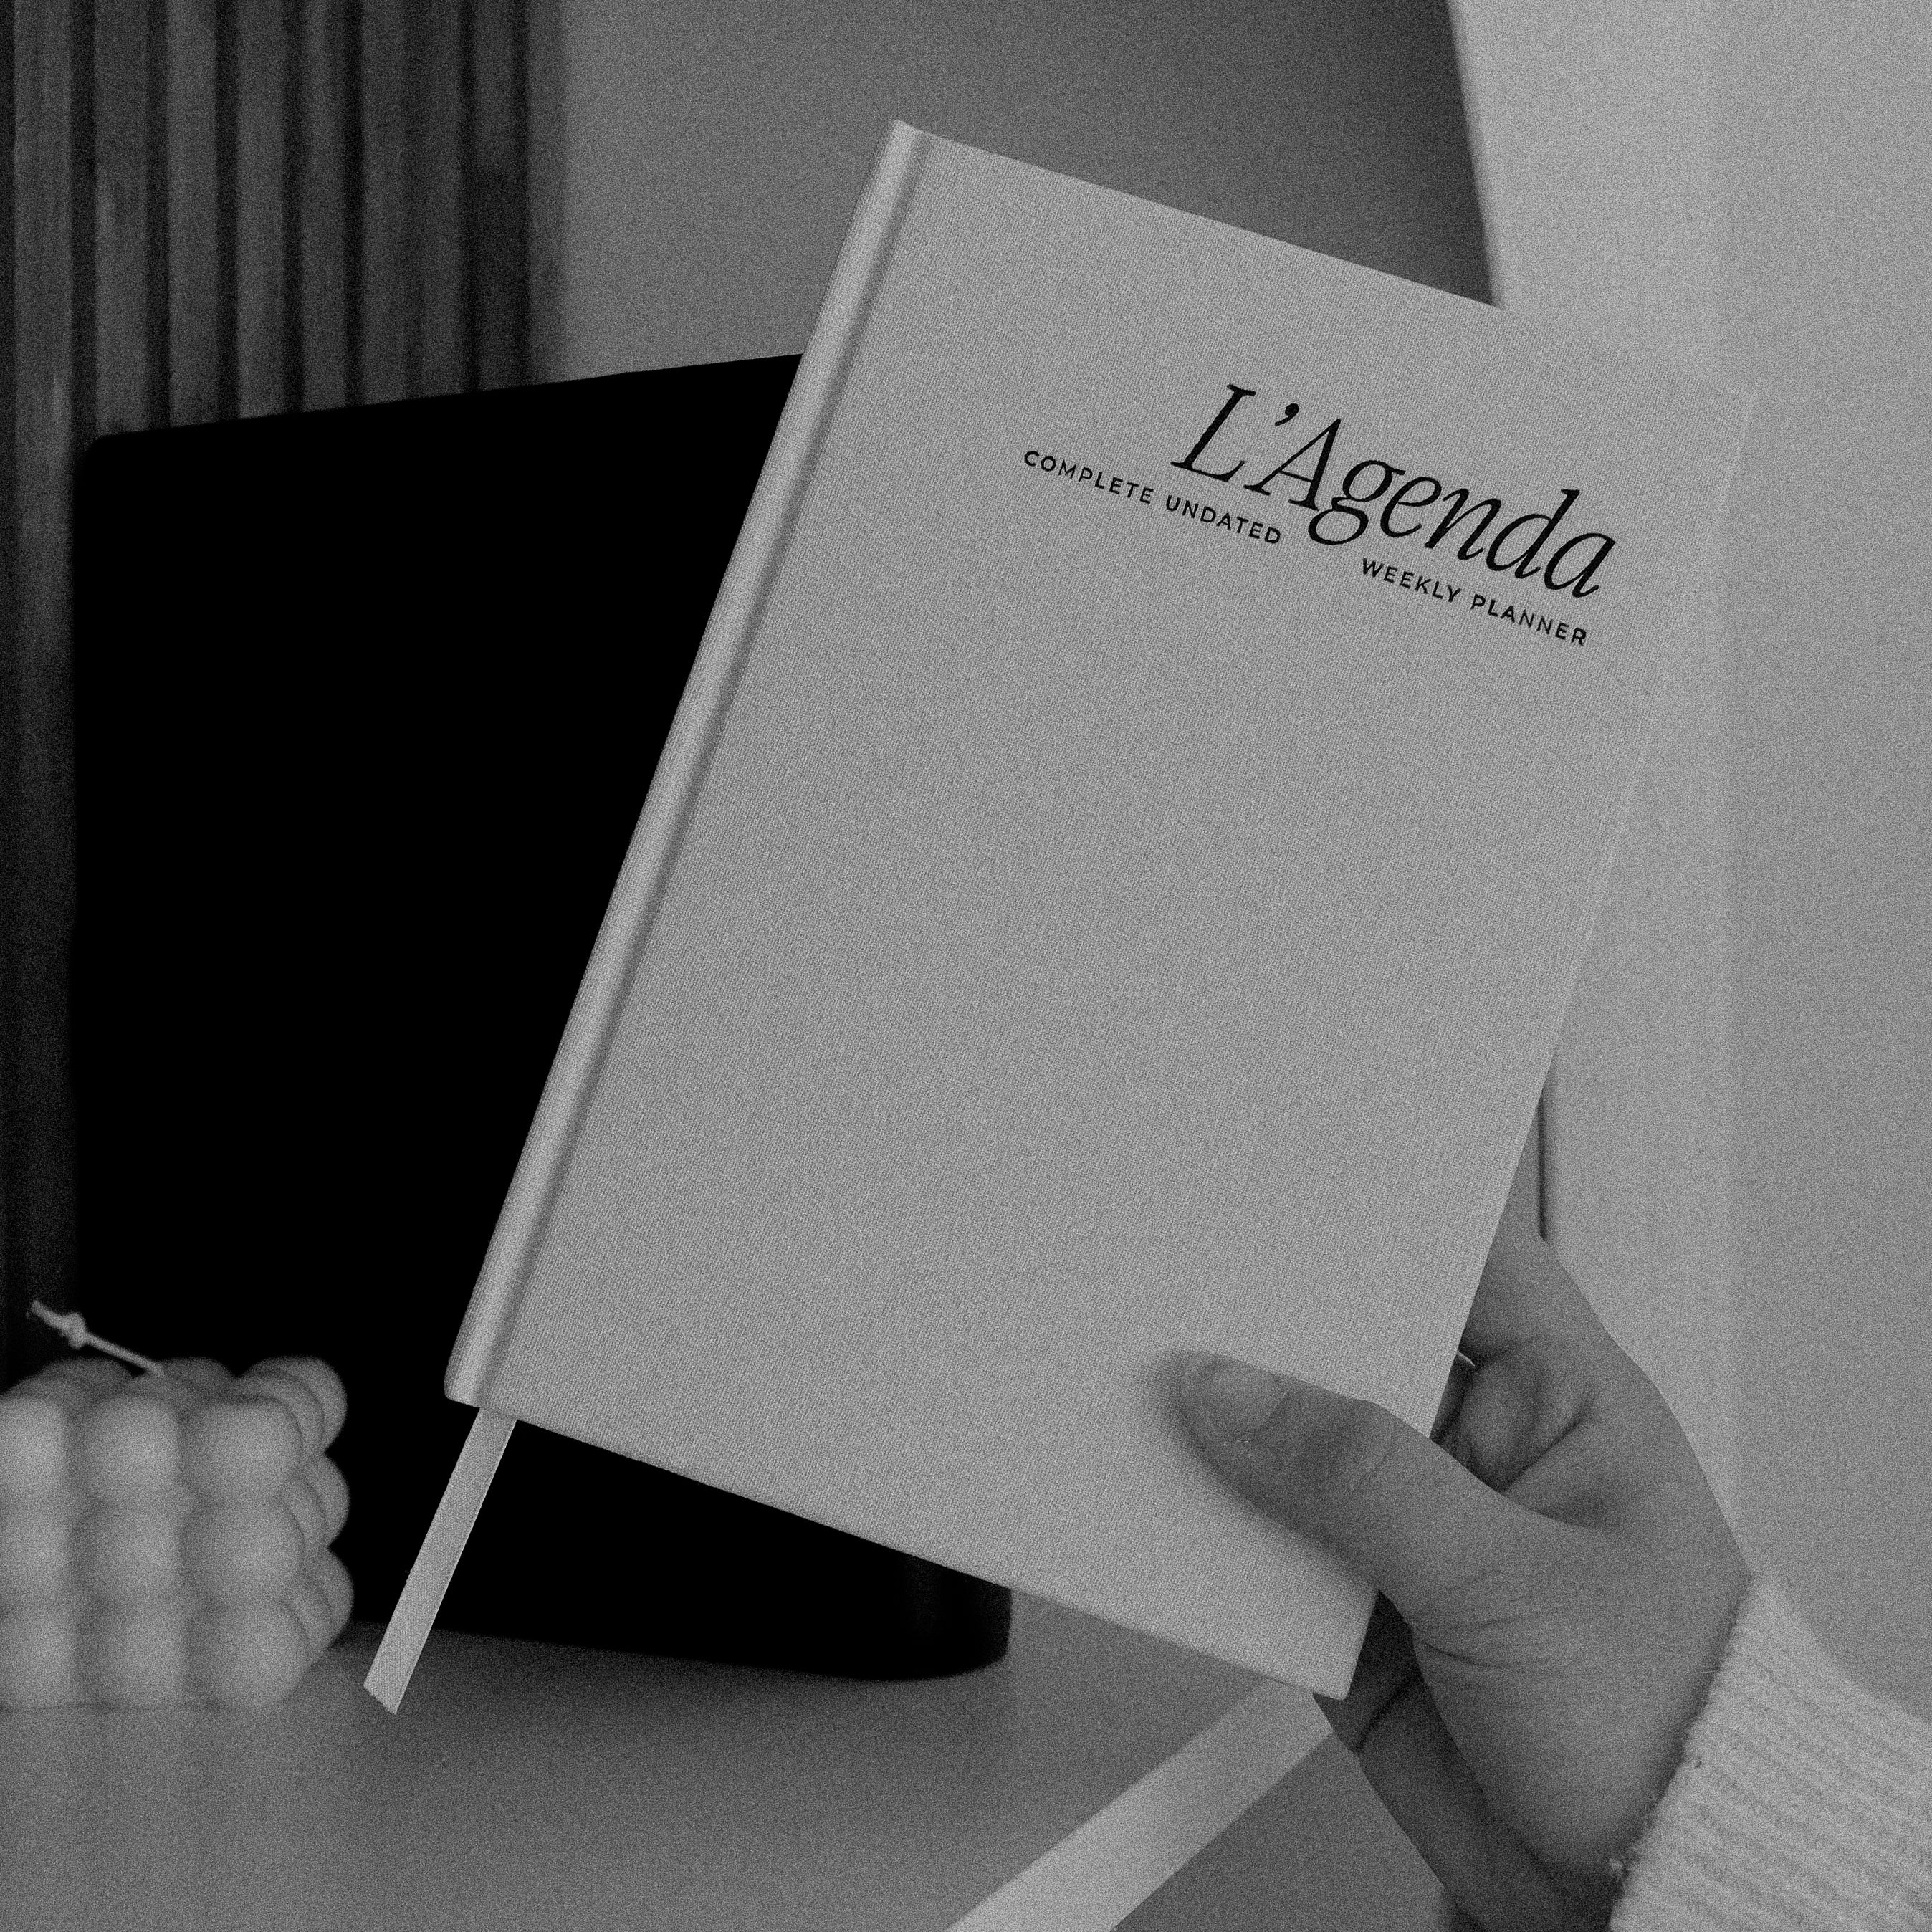 L&#39;Agenda : The Complete Undated Weekly Planner